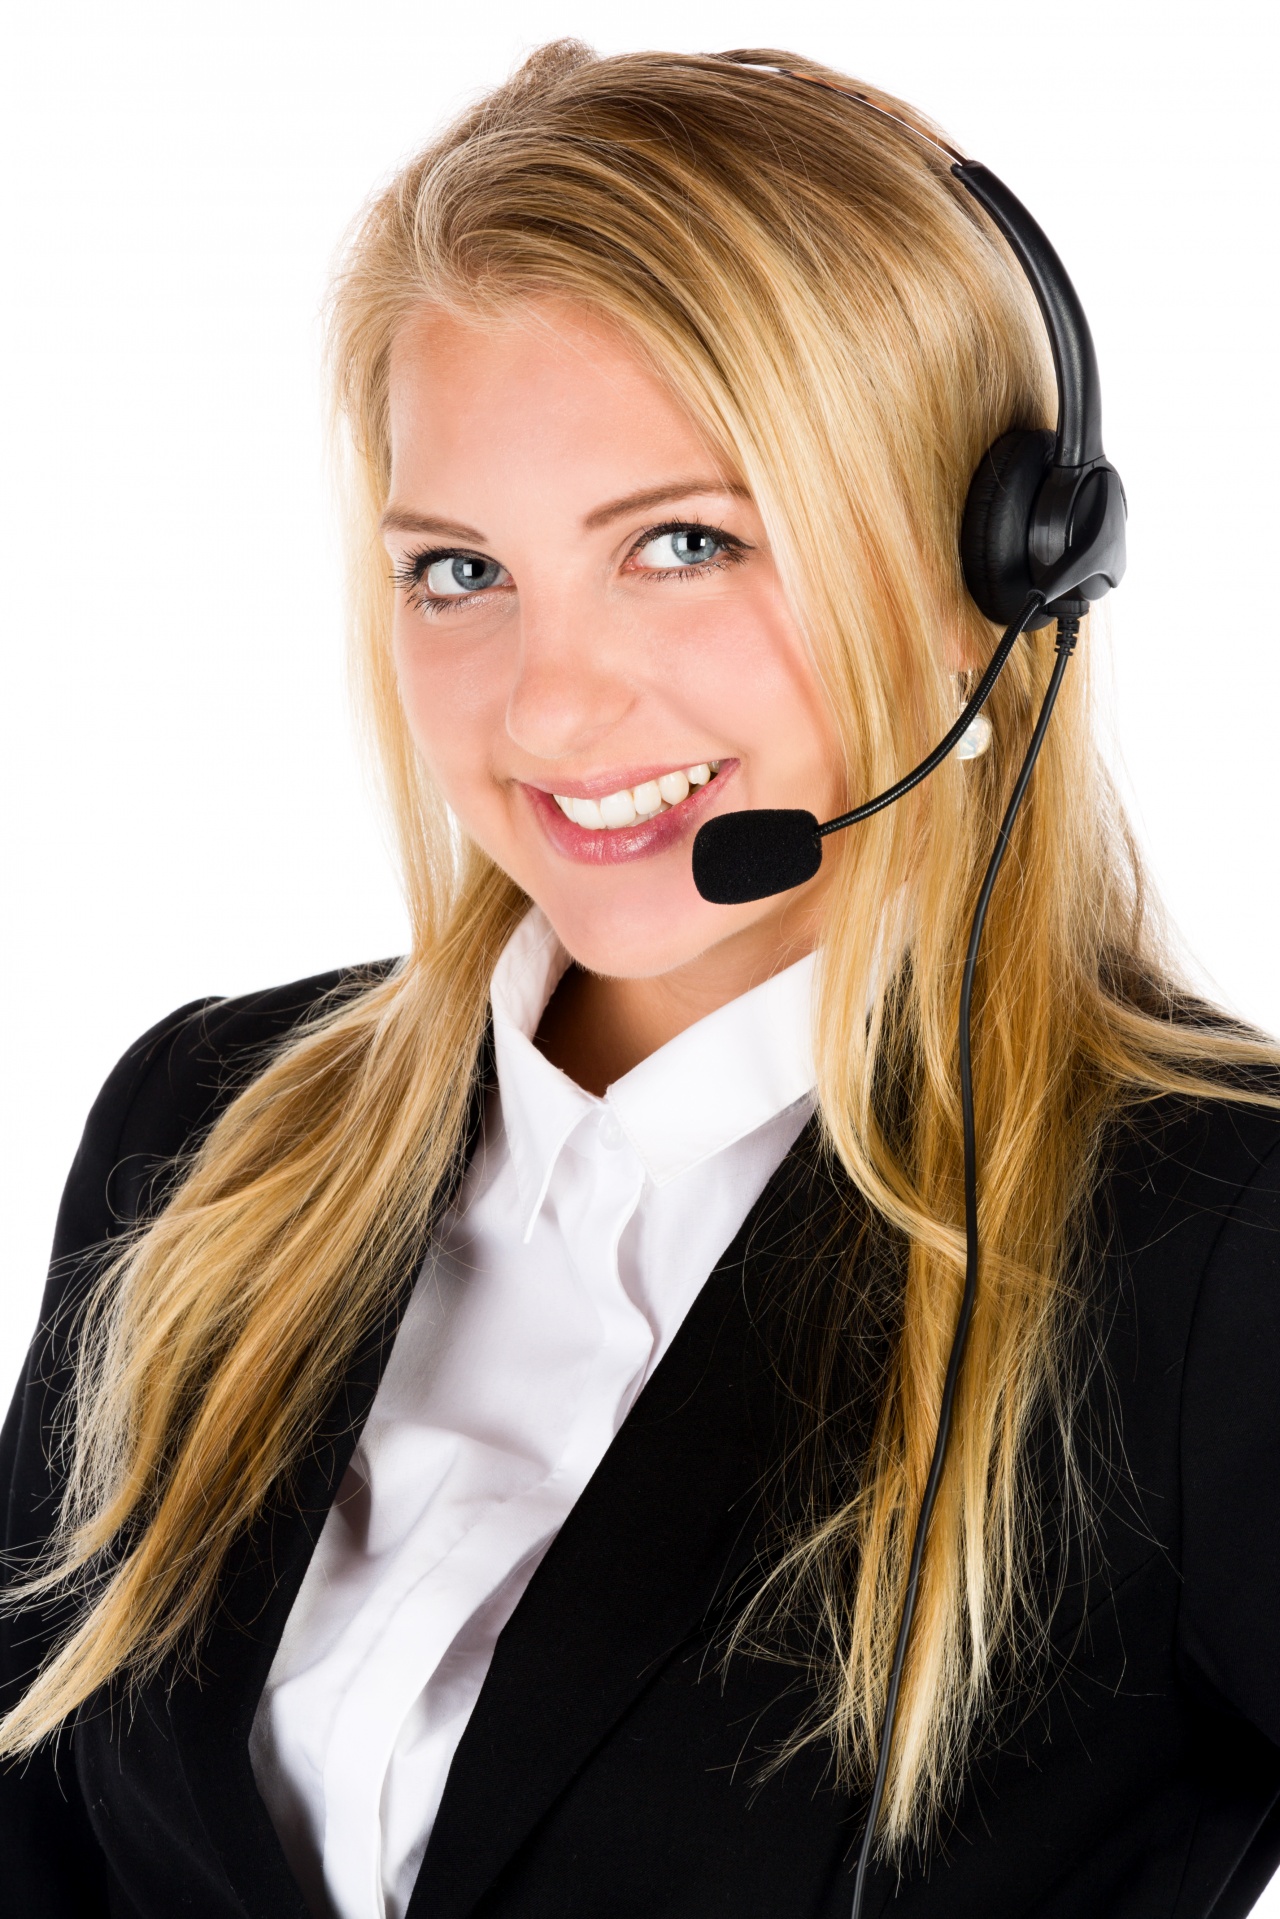 https://www.publicdomainpictures.net/pictures/210000/velka/business-woman-with-a-headset-1488653274PSh.jpg